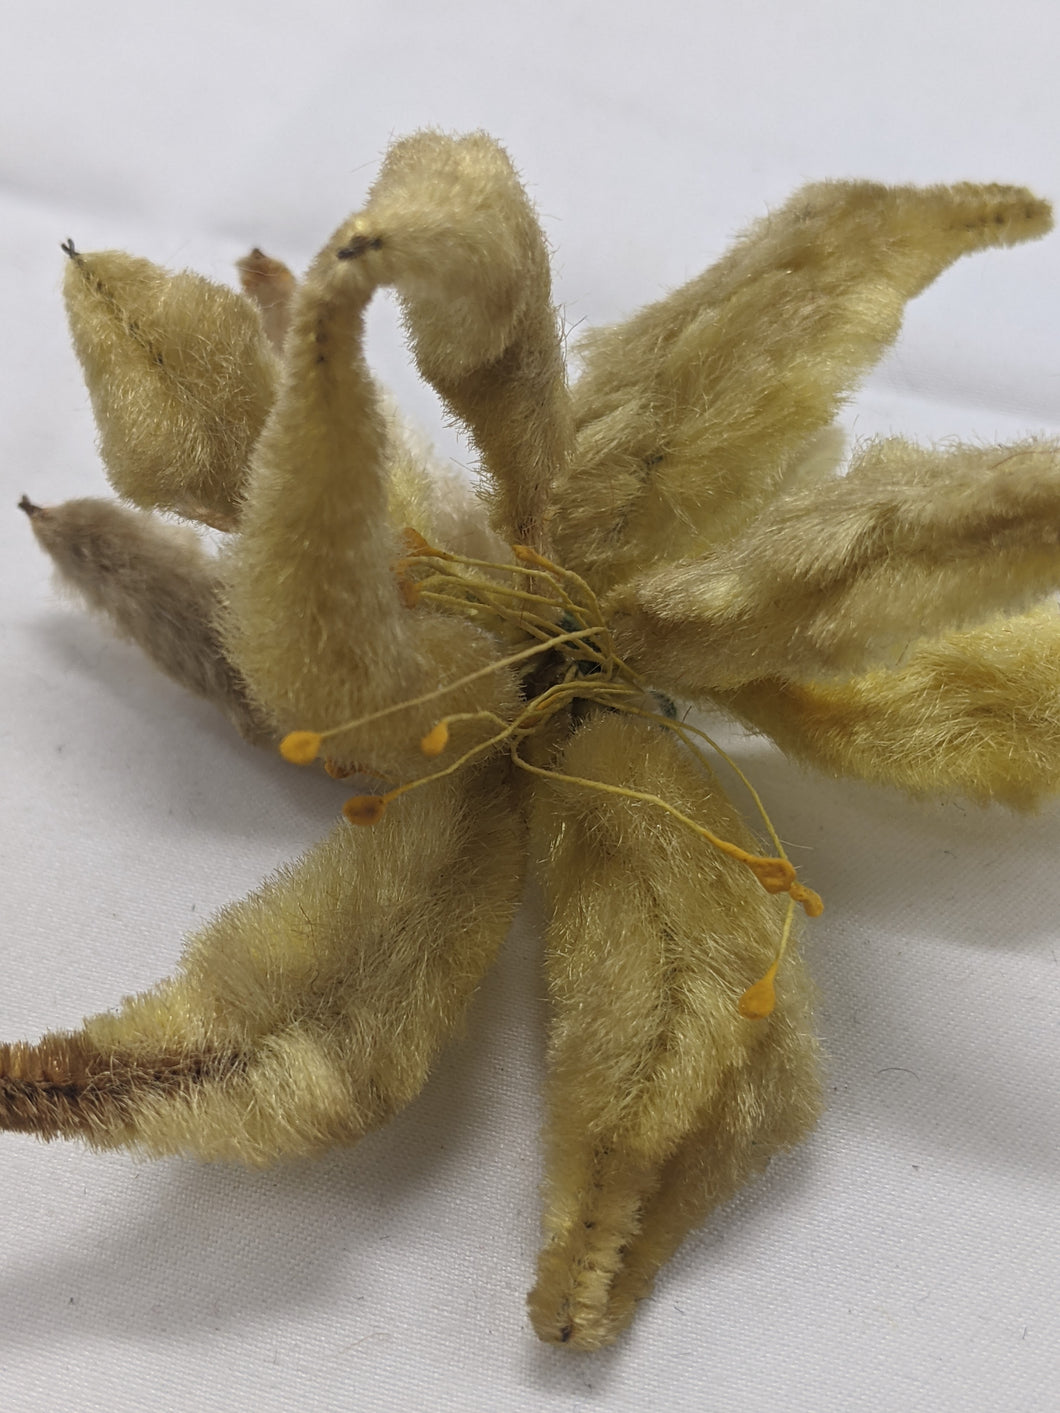 Early Victorian Chenille Yellow Poinsettia Flower Ornament